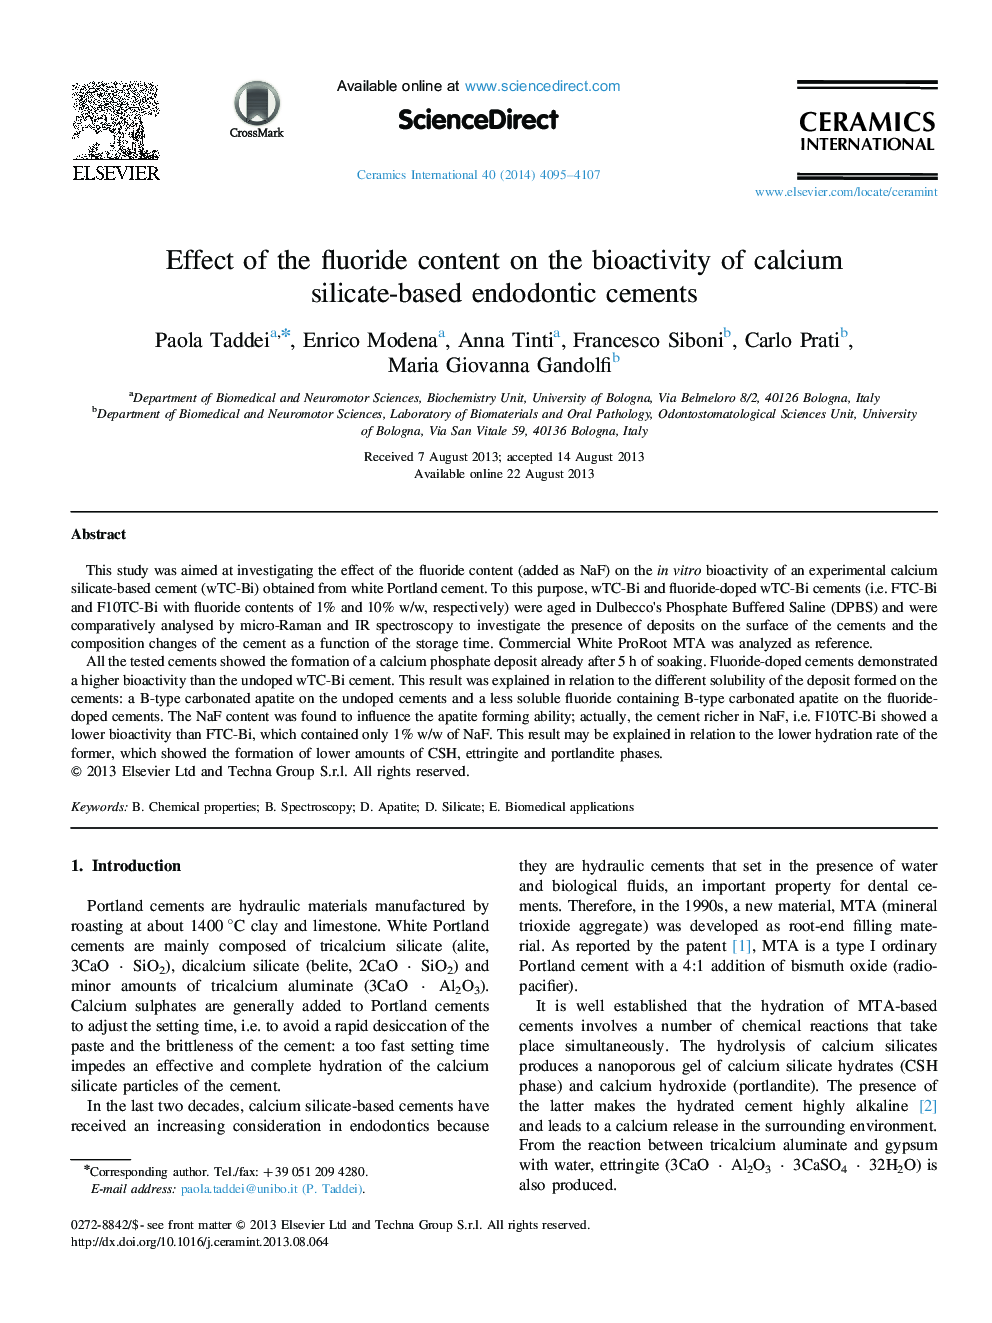 Effect of the fluoride content on the bioactivity of calcium silicate-based endodontic cements